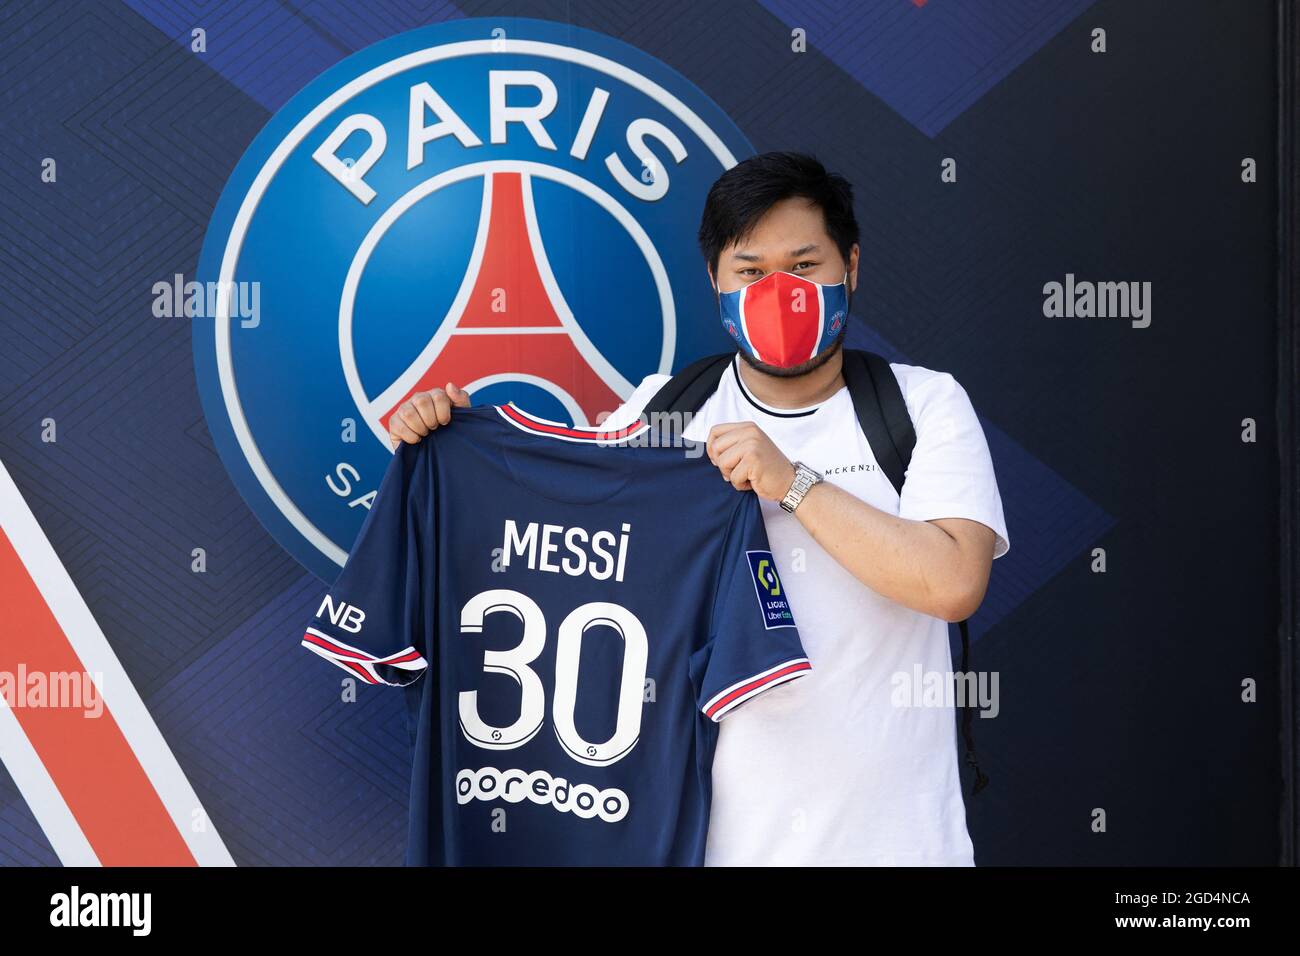 Paris, France. 11th Aug, 2021. A supporter shows a jersey of PSG's Argentinian football player Lionel Messi, that he has just bought at the Paris-Saint-Germain (PSG) football club store on the Champs Elysees avenue in Paris on August 11, 2021. Messi signed on August 10, 2021 a two-year deal with PSG with the option of an additional year. The 34-year-old will wear the number 30 in Paris, the number he had when he began his professional career at Barca. Photo by Raphael Lafargue/ABACAPRESS.COM Credit: Abaca Press/Alamy Live News Stock Photo